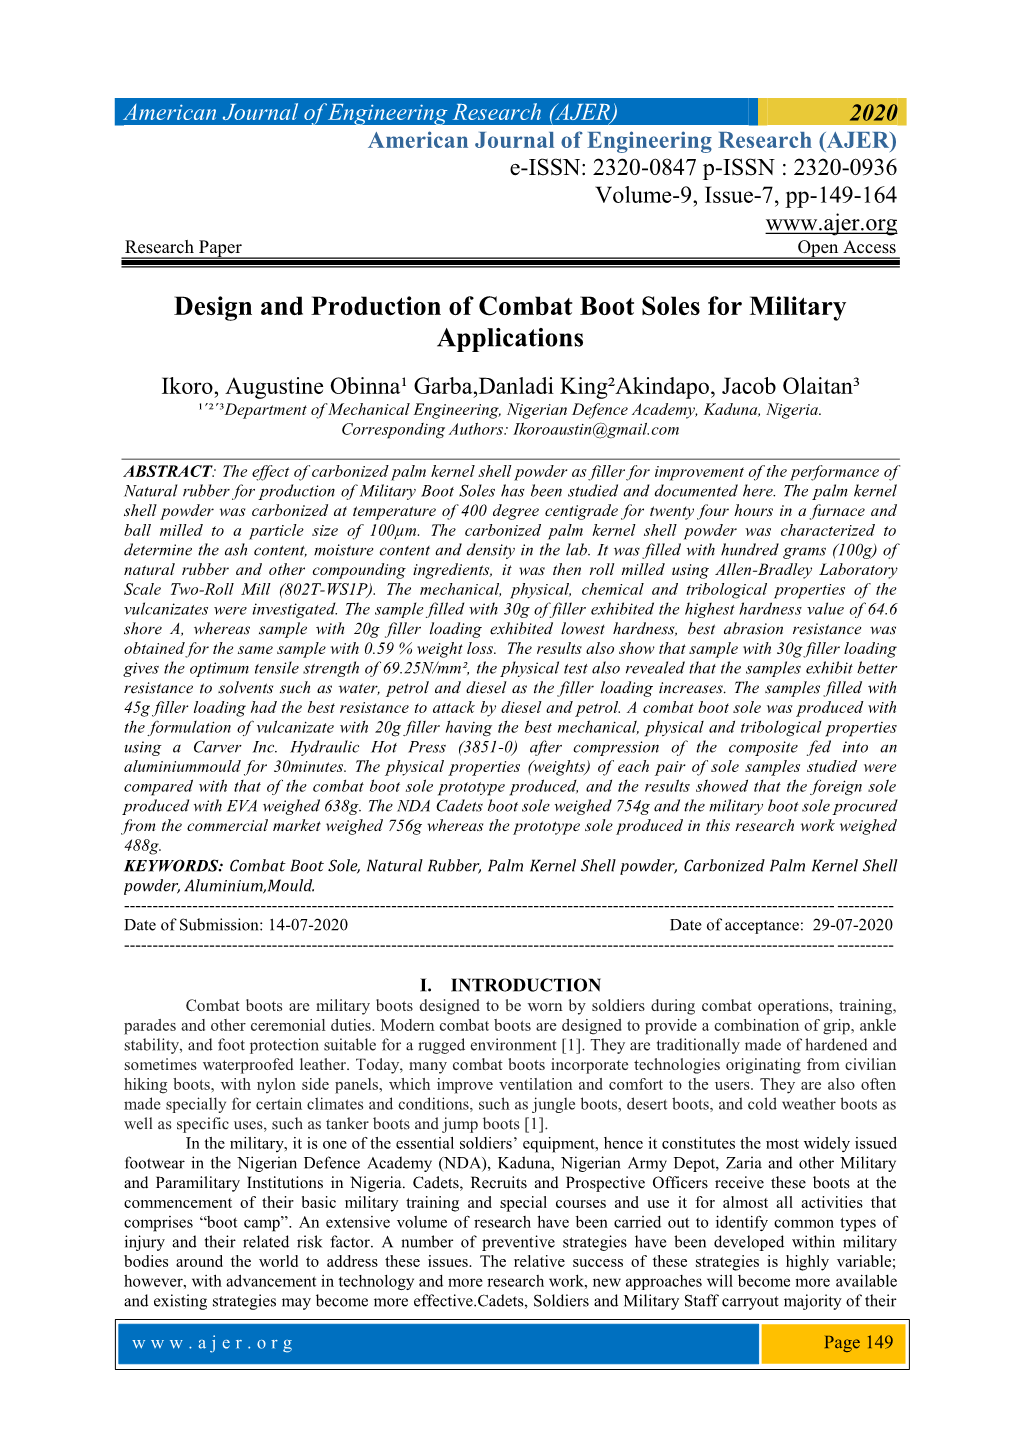 Design and Production of Combat Boot Soles for Military Applications